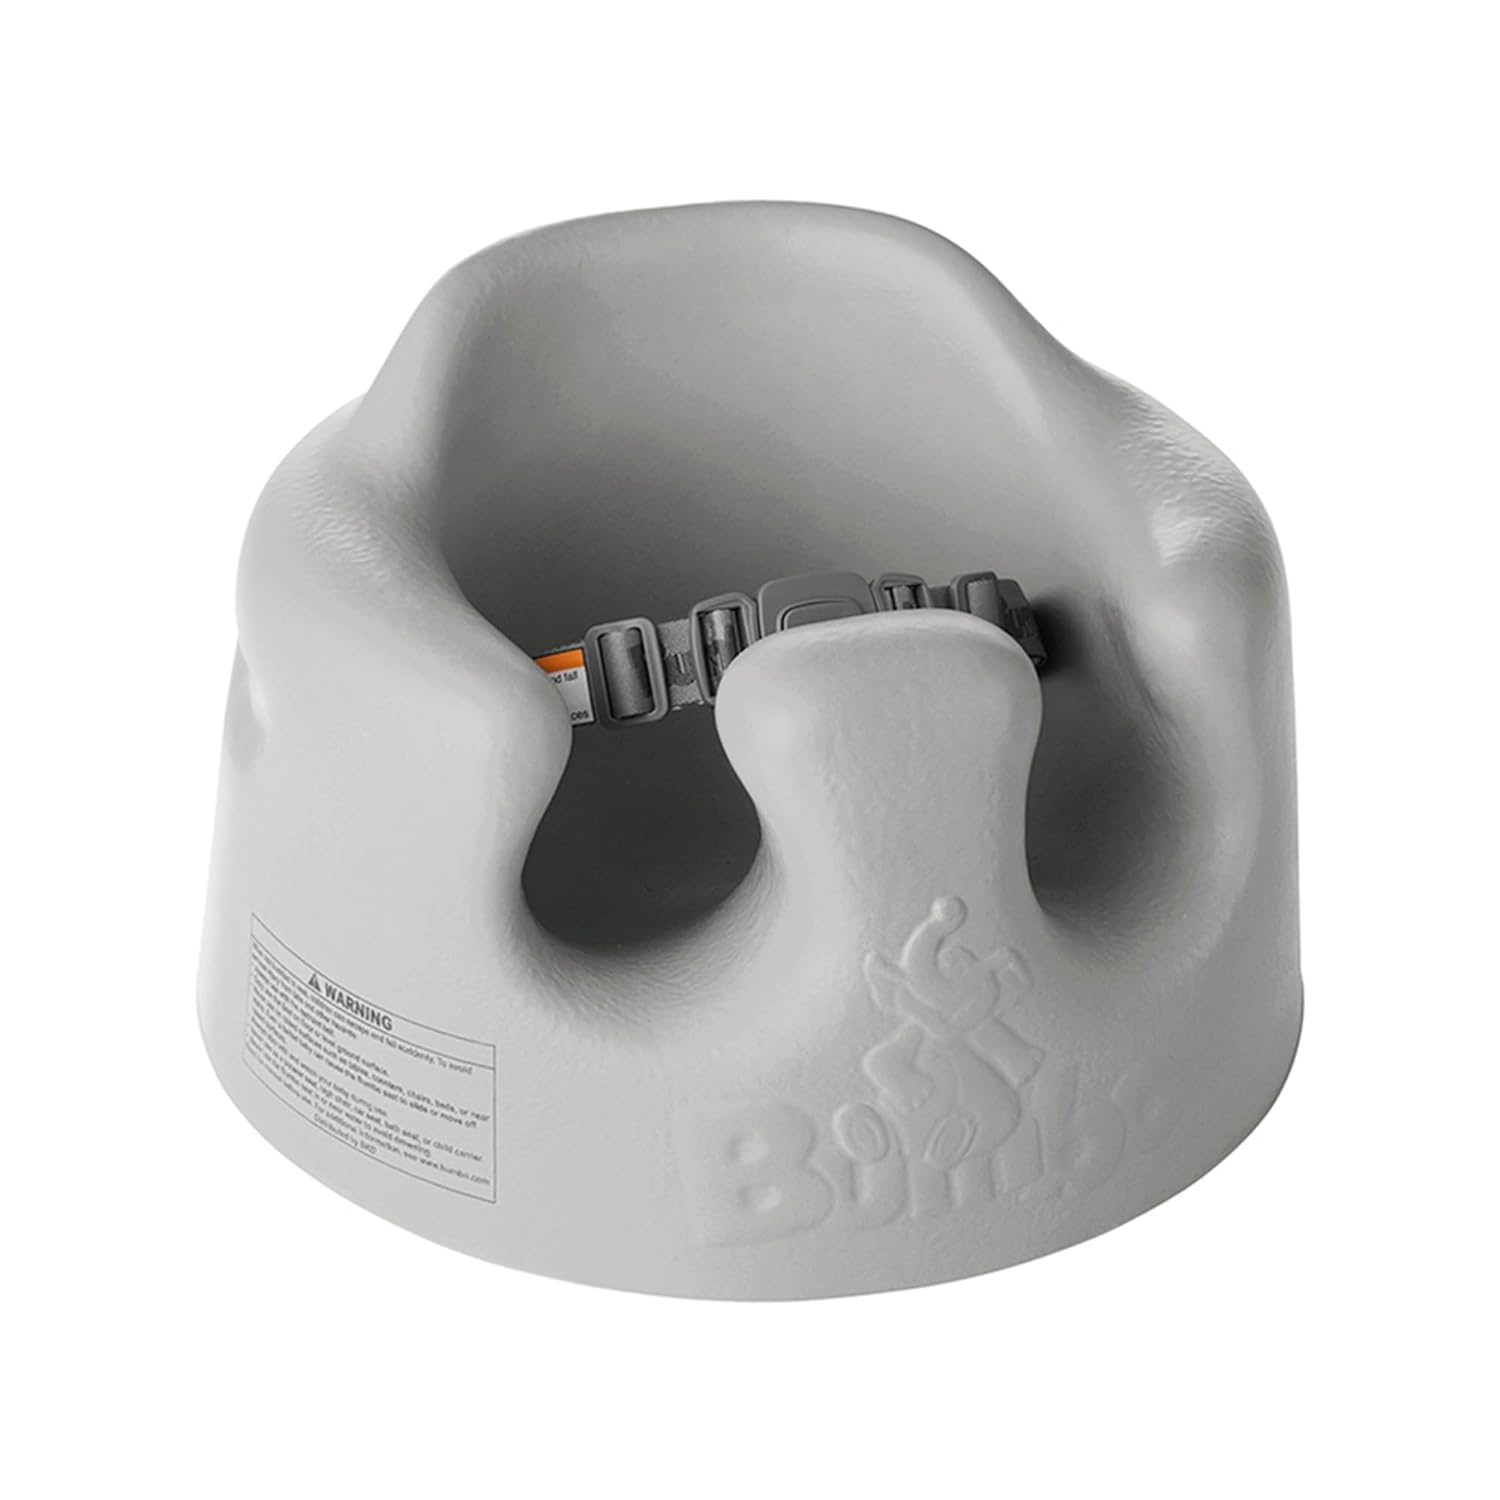 Bumbo Bumbo Infant Sit Up Support Floor Seat | 3-12 Months (In Store Exclusive)